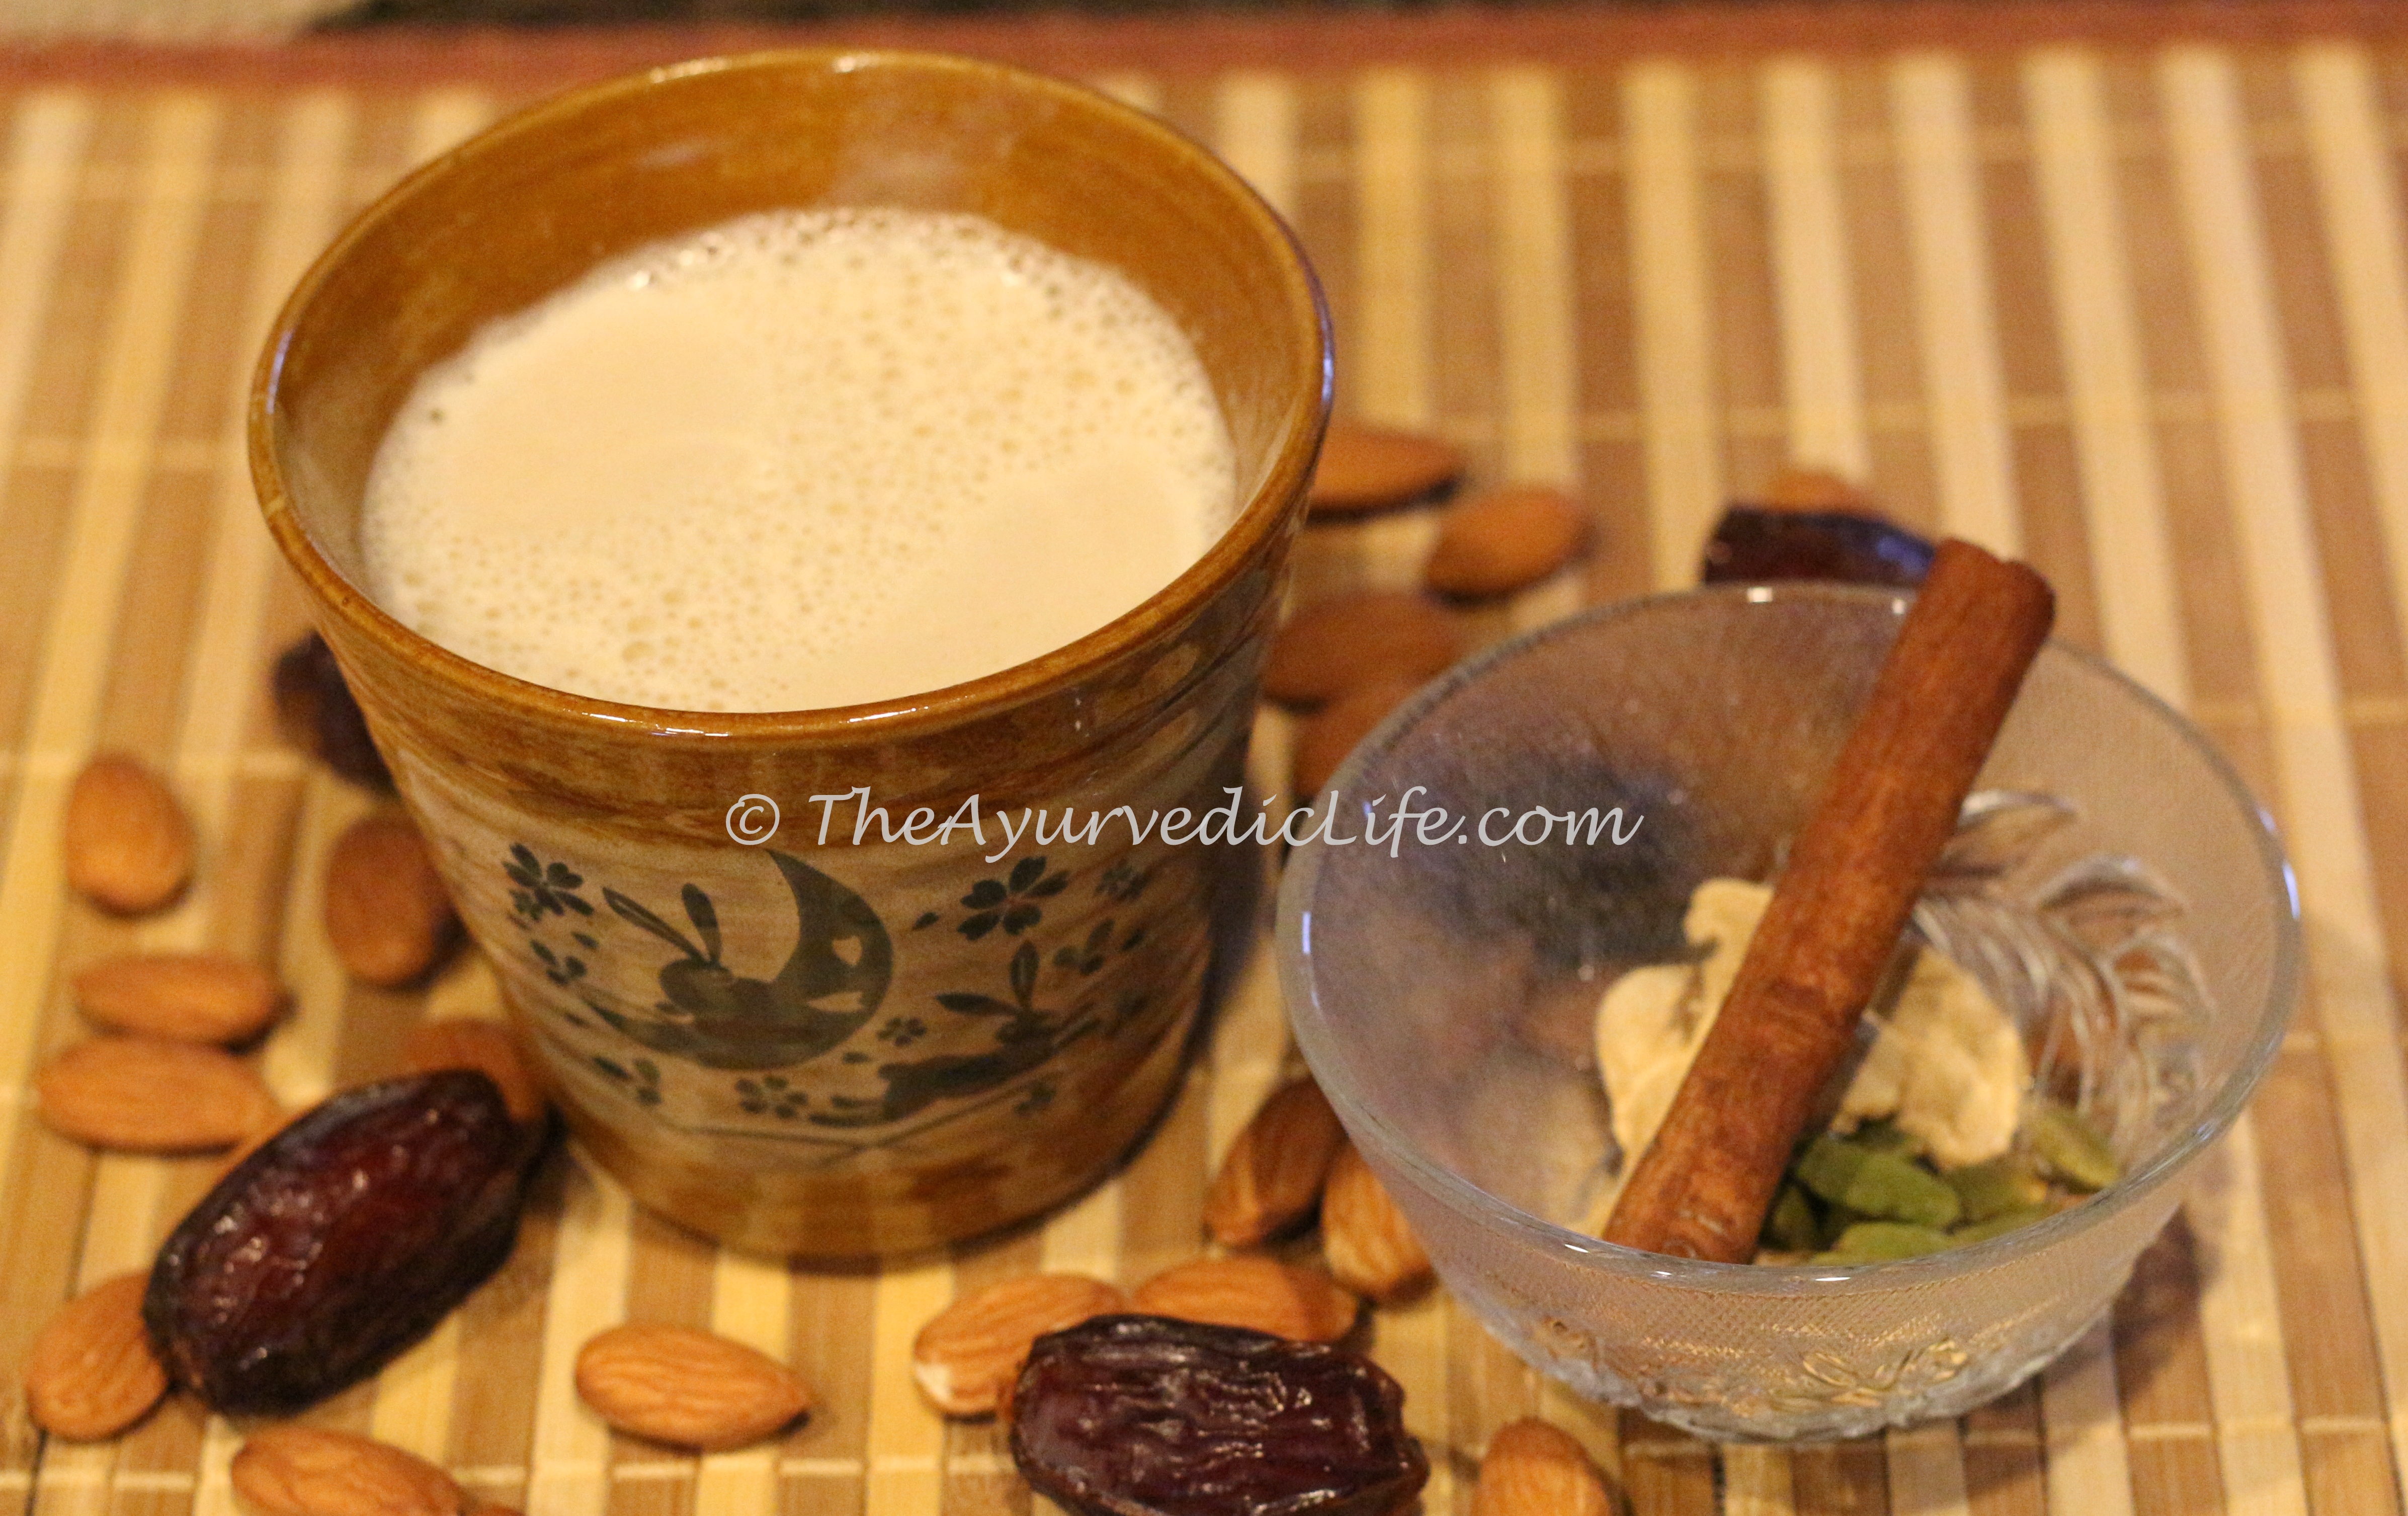 http://theayurvediclife.com/wp-content/uploads/2014/11/Spice-Infused-Date-Almond-Milk.jpg